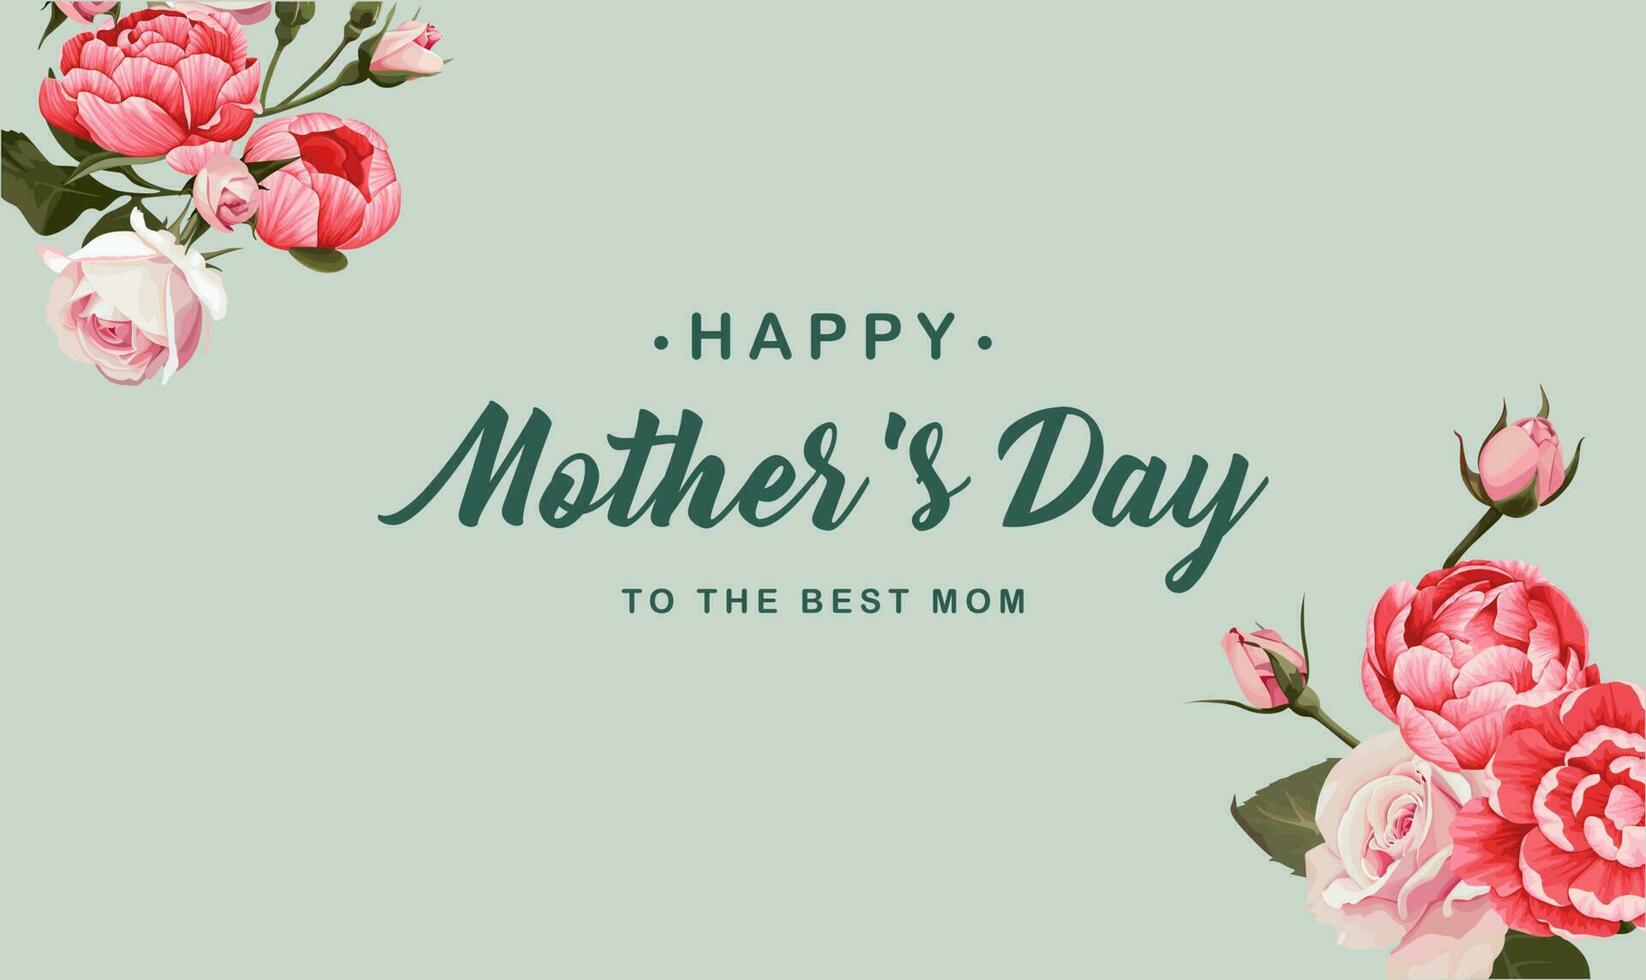 Mother's Day Background with colorful elements and flowers, lettering. Vector symbols of love in the shape of hearts for greeting card design, floral, pastel color.